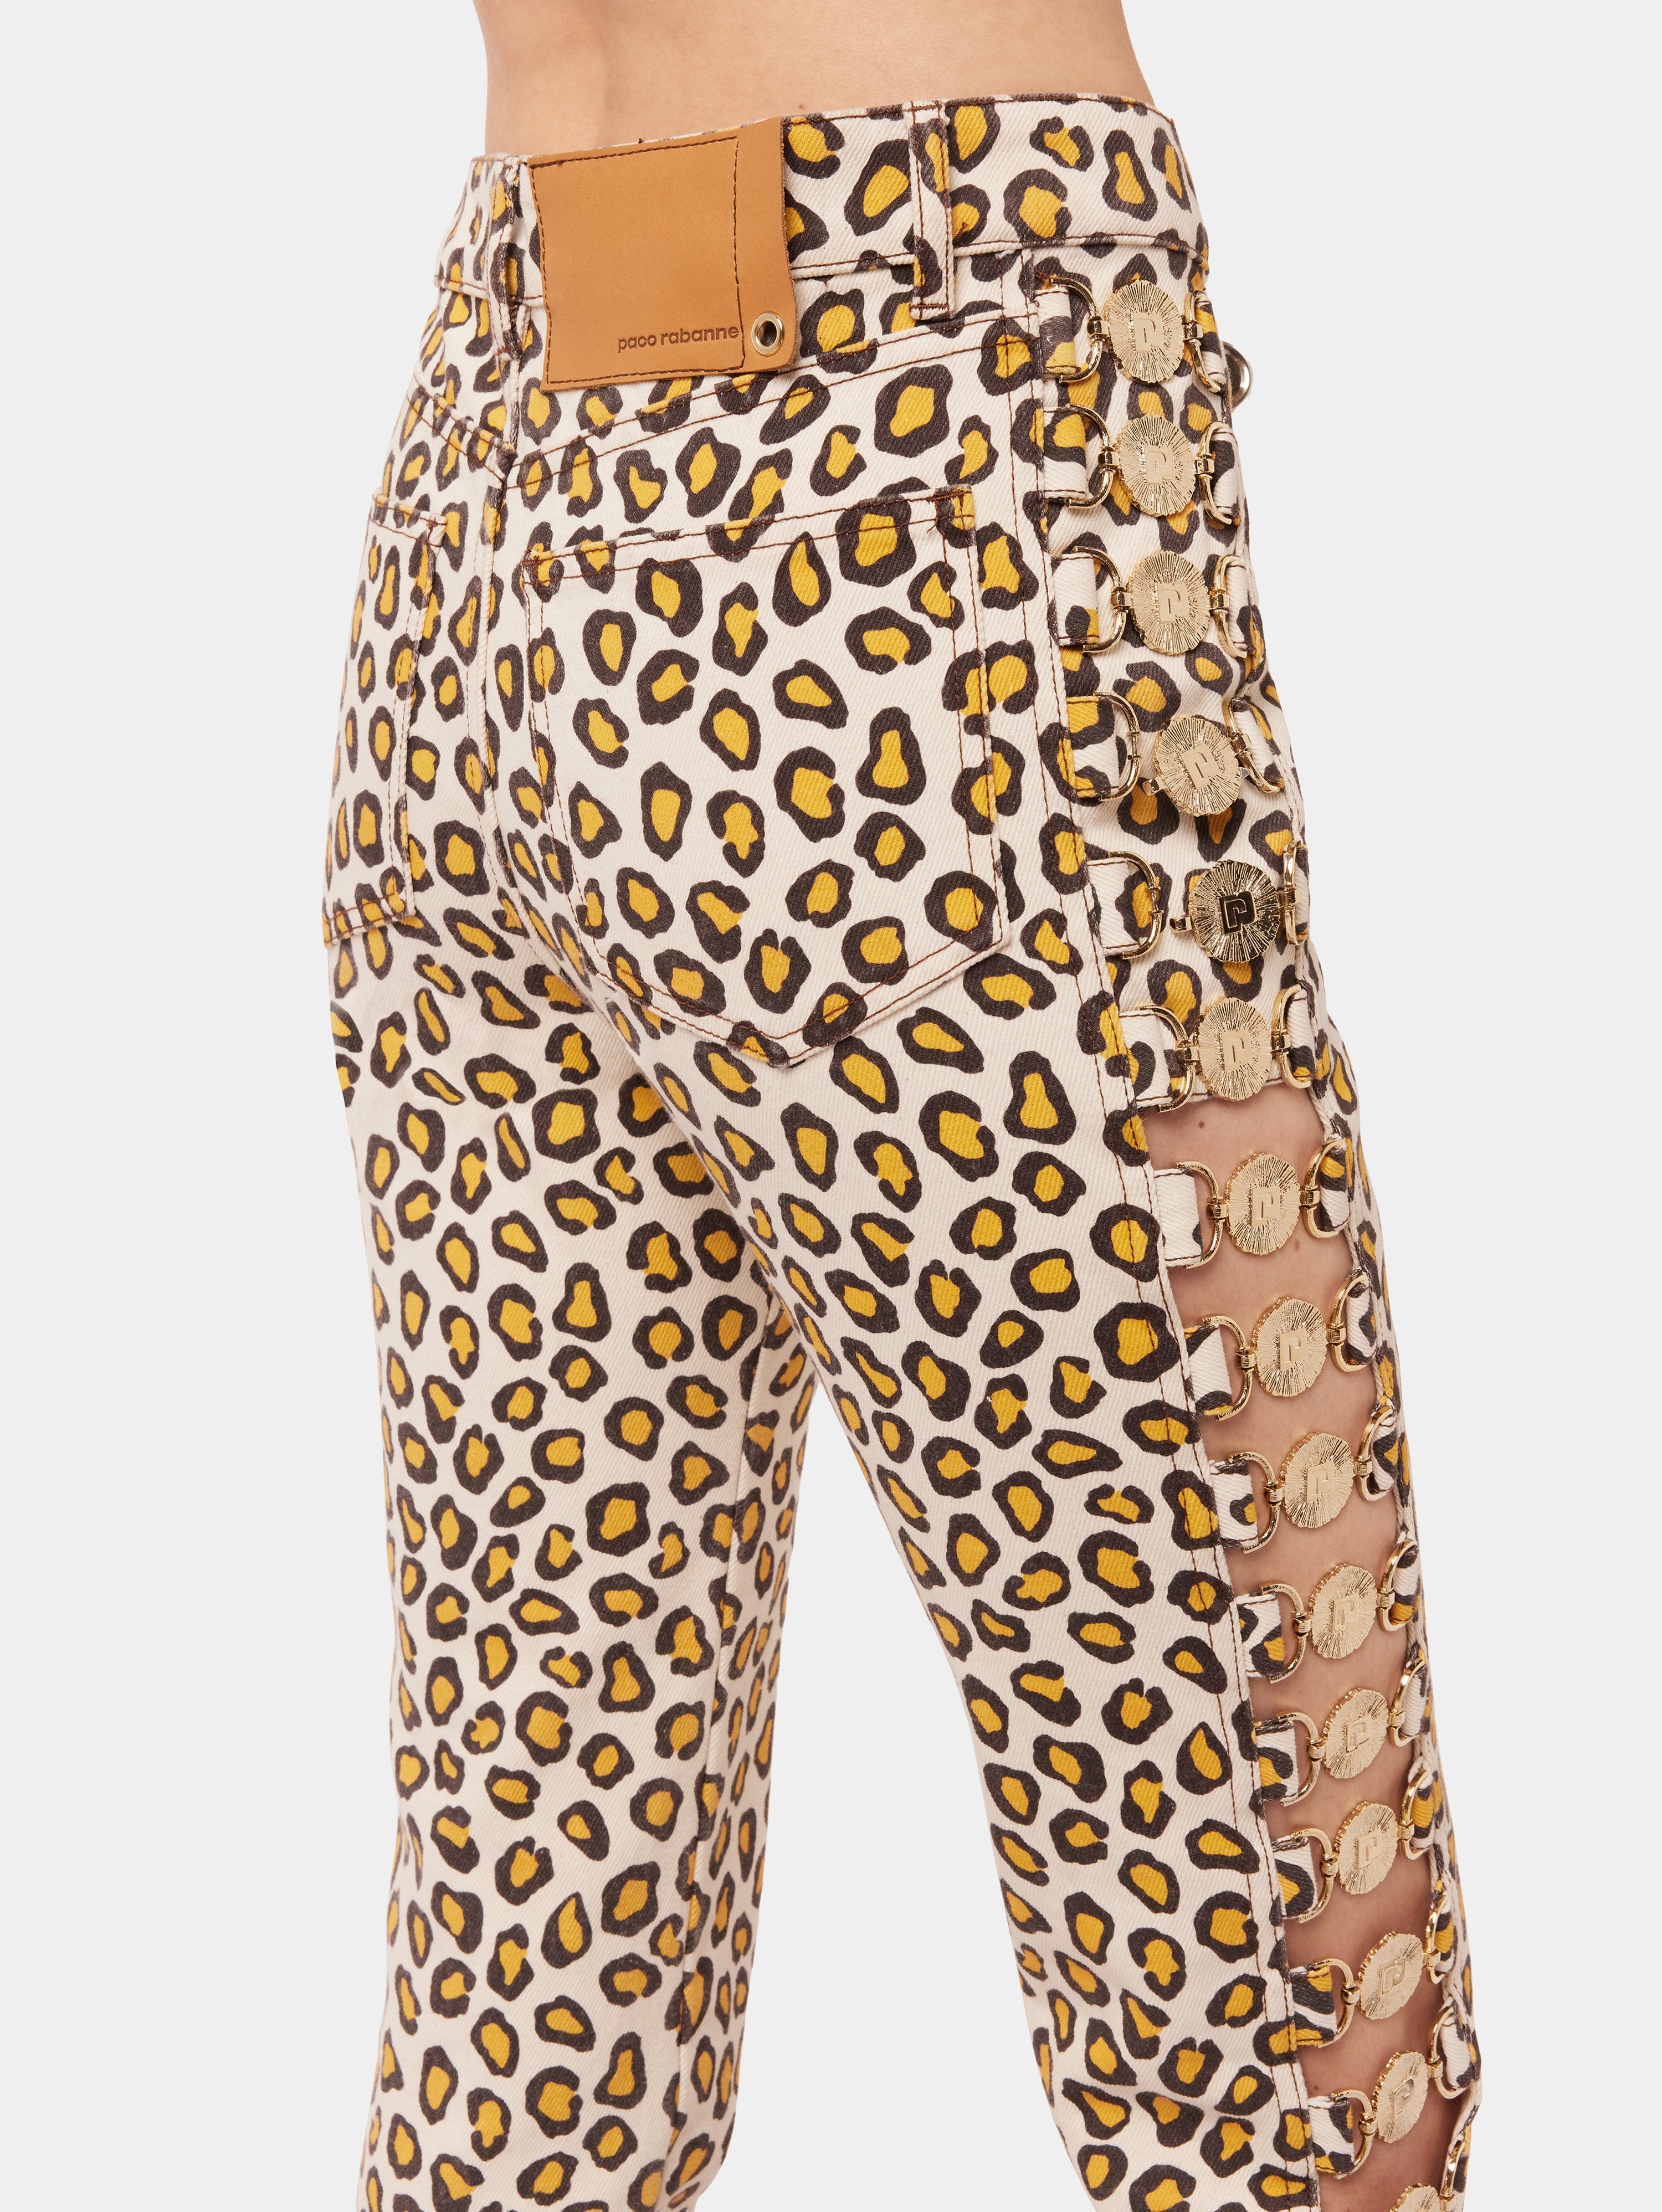 LEOPARD PRINTED FITTED PANTS - 4